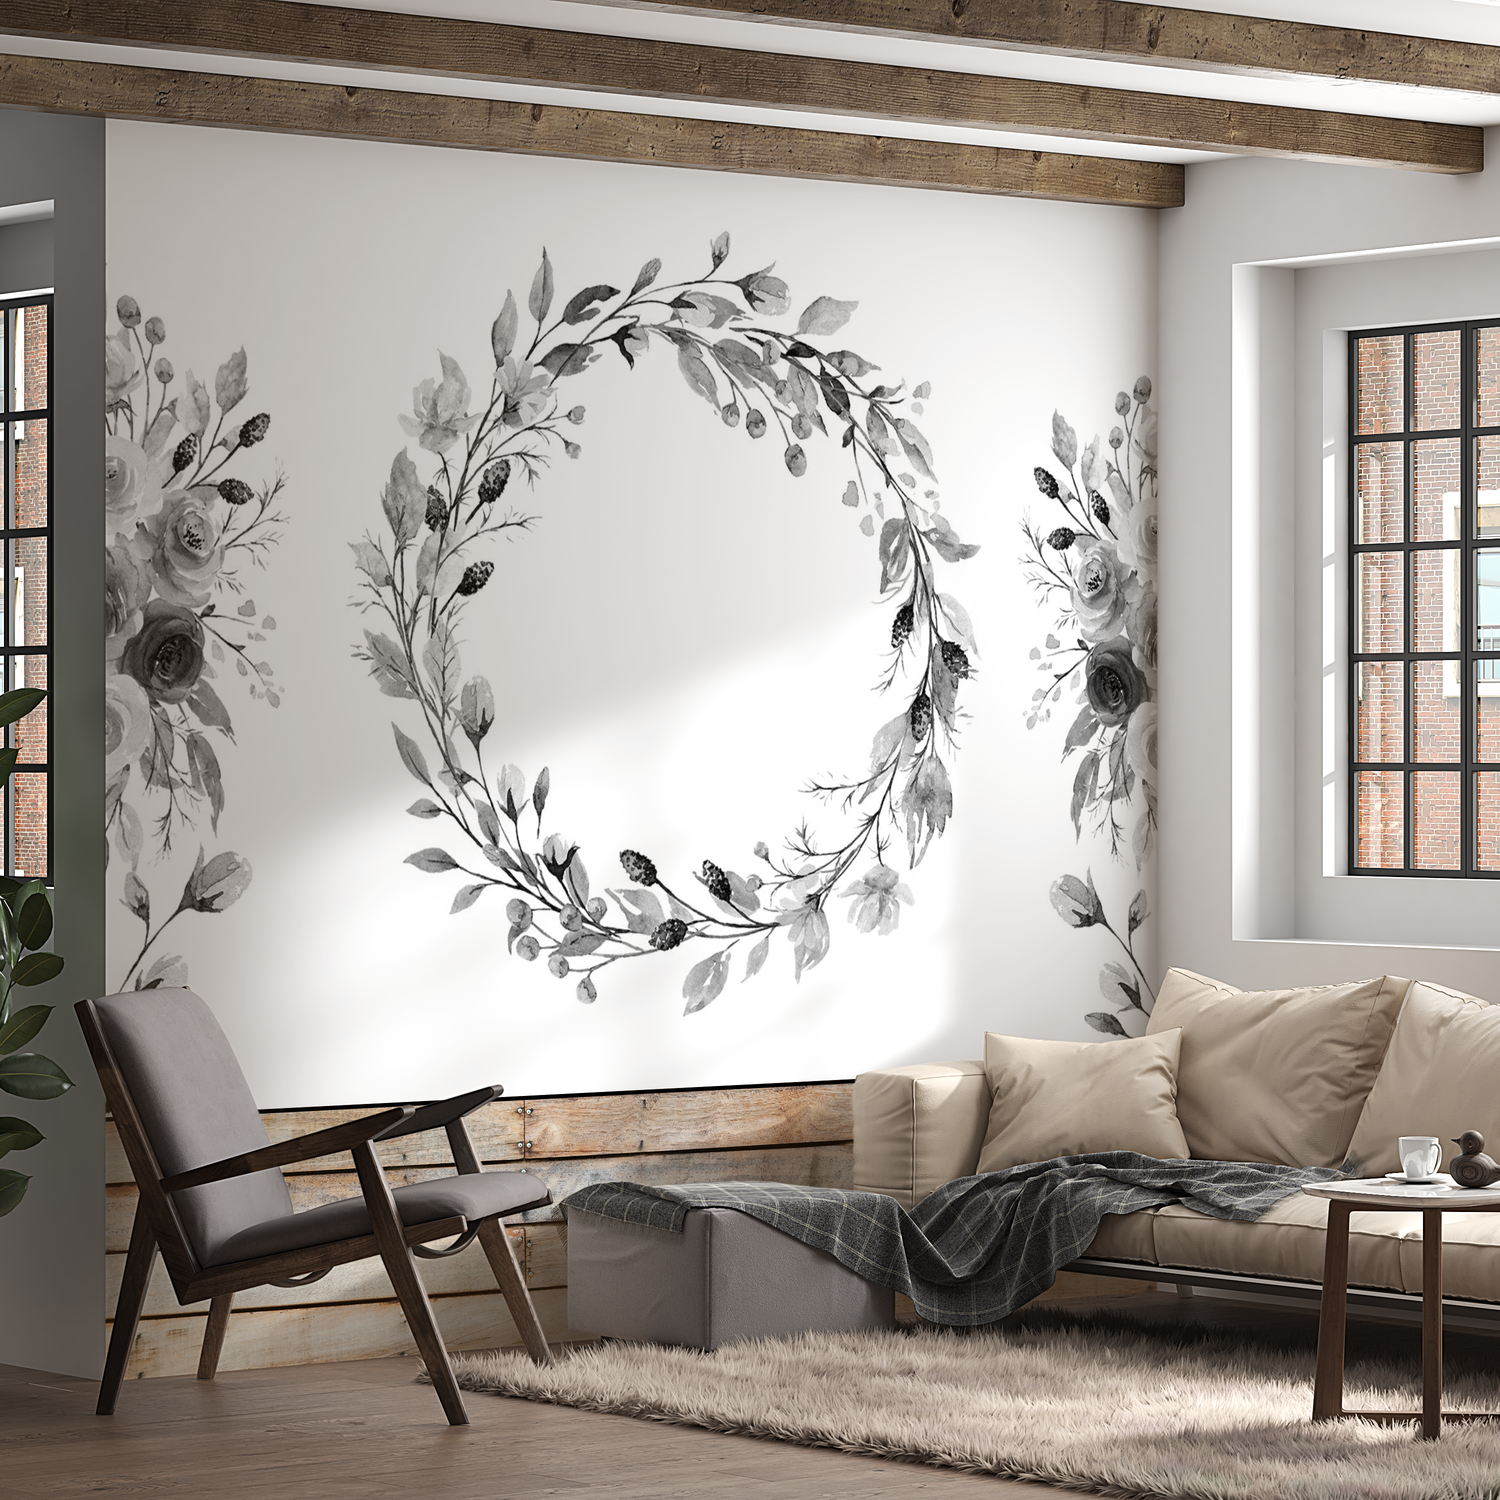 Peel & Stick Floral Wall Mural - Romantic Wreath Grey - Removable Wallpaper 38"Wx27"H